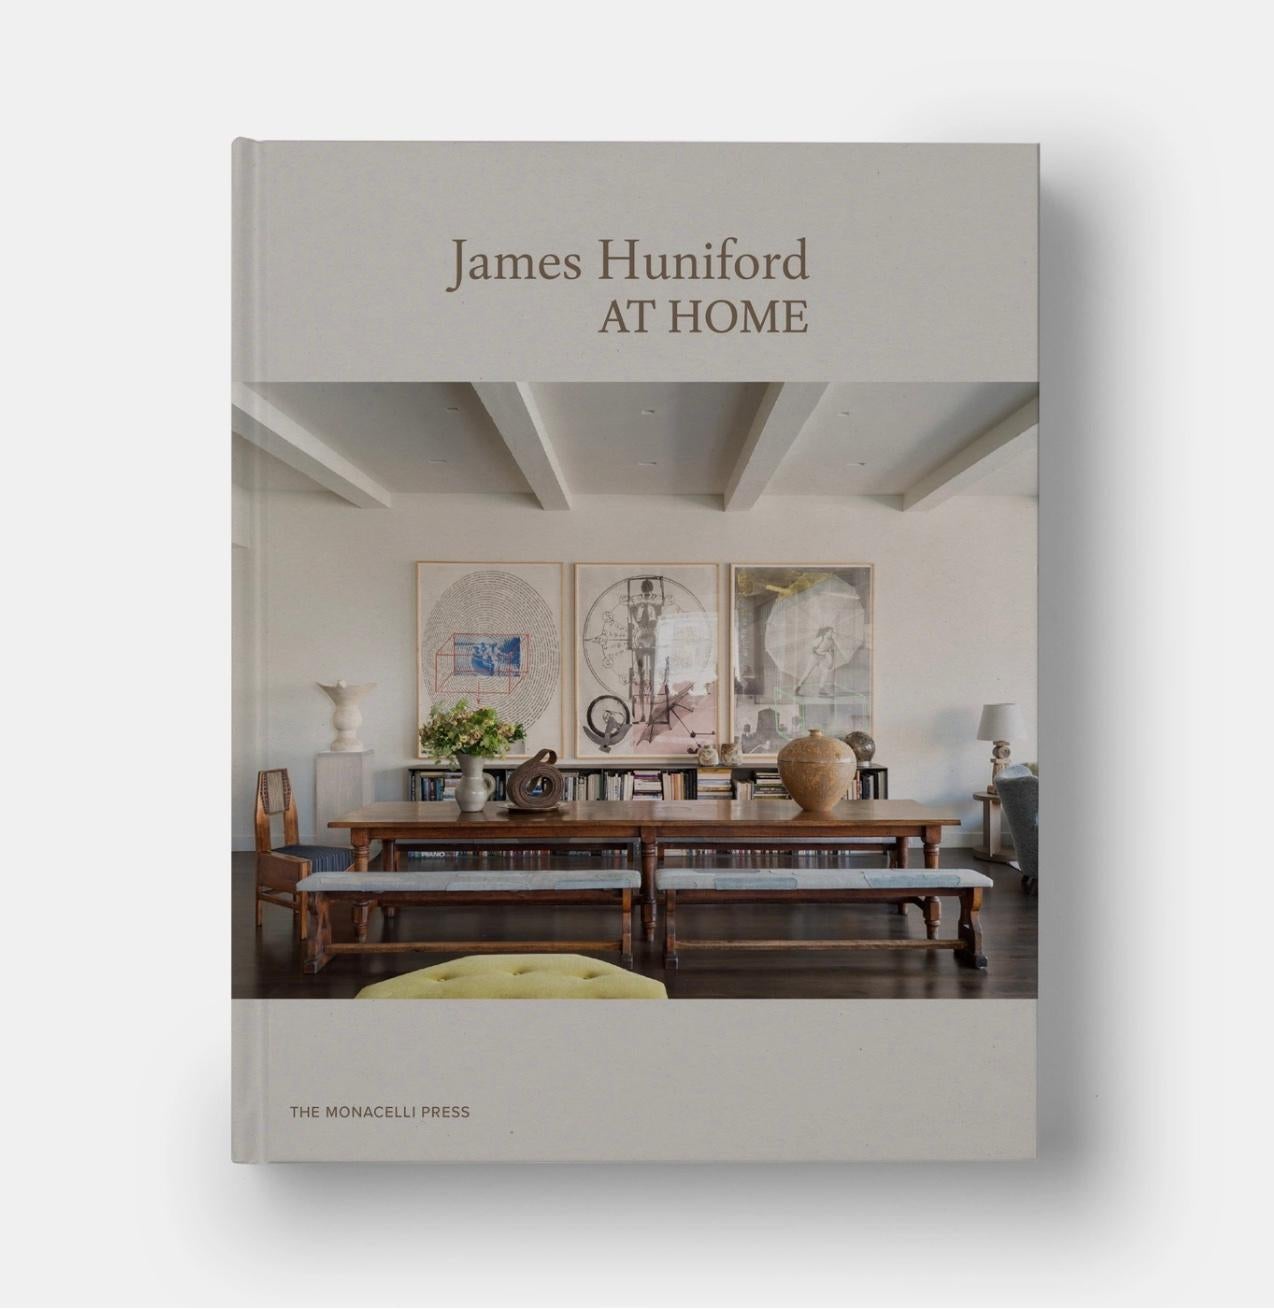 Brand new copy of James Huniford At Home, hard cover by Monacelli Press, 2020. Just bought it at a Barnes and Noble closing sale to realize I already have it! Oops. My loss is your gain. 

Flipped through once. Tight binding, brand new